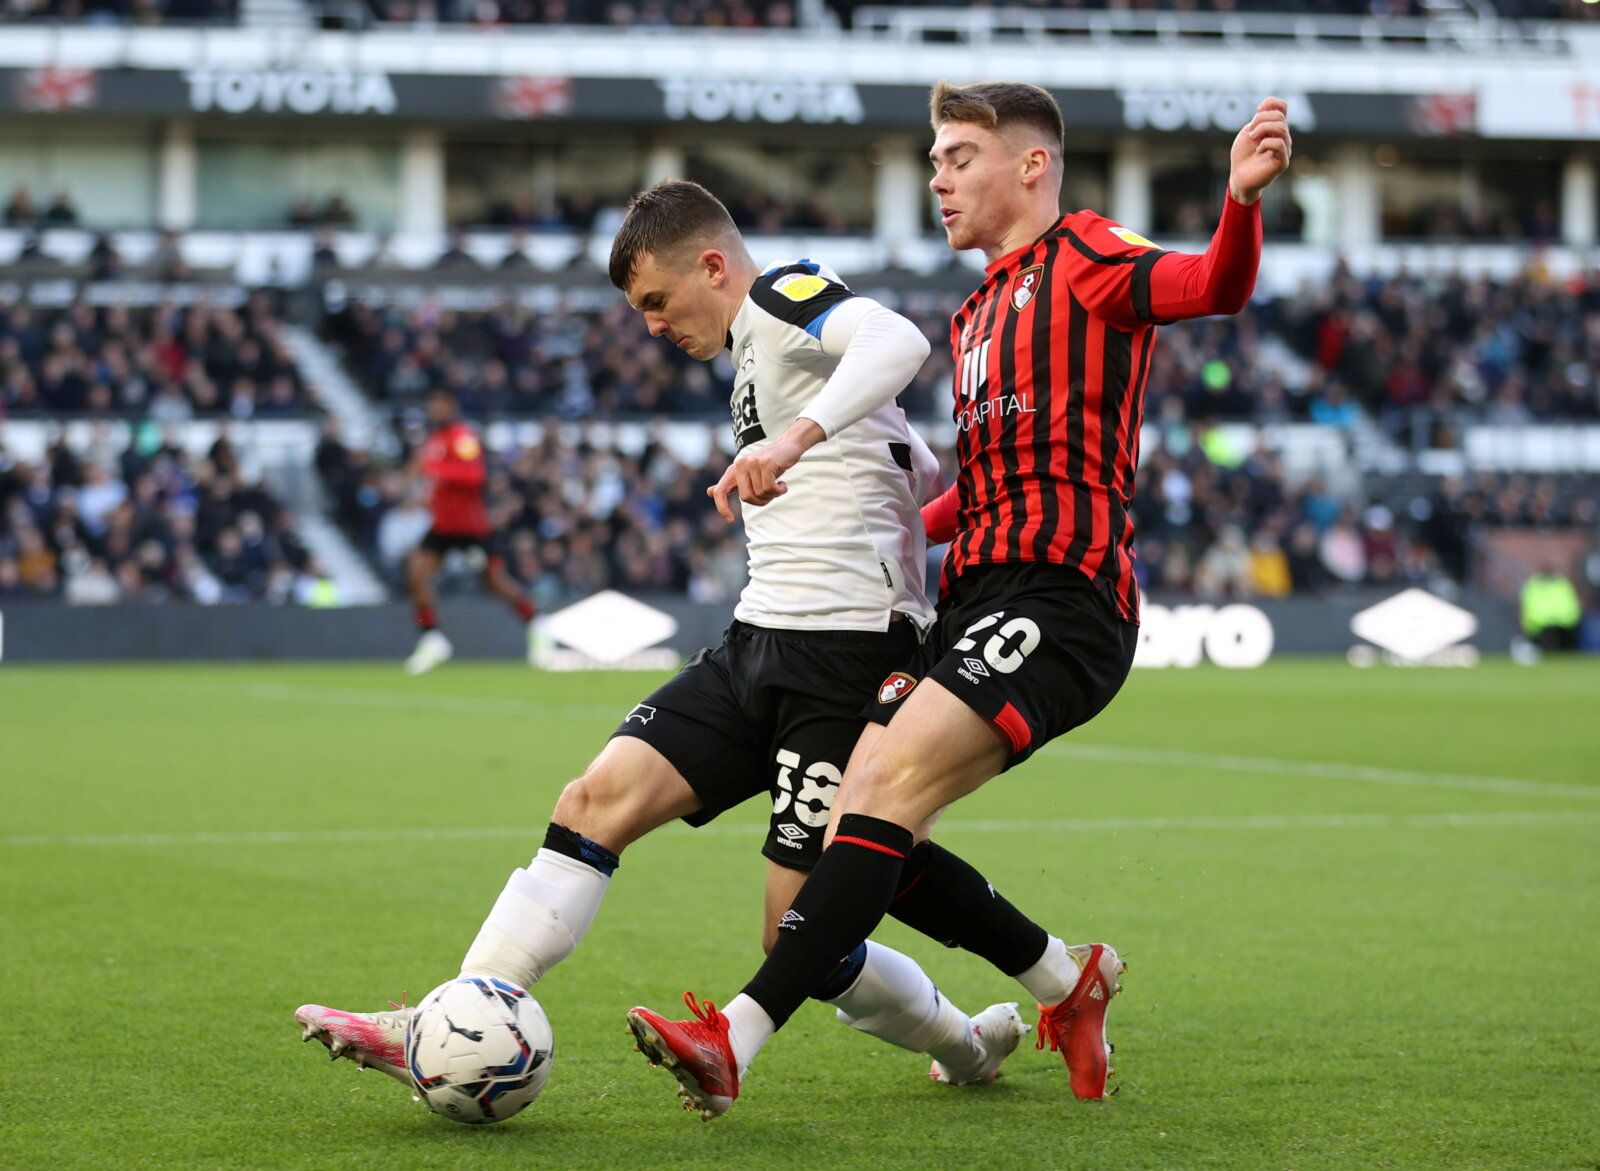 Soccer Football - Championship - Derby County v AFC Bournemouth - Pride Park, Derby, Britain - November 21, 2021 Derby County's Jason Knight in action with Bournemouth's Leif Davis  Molly Darlington/Action Images